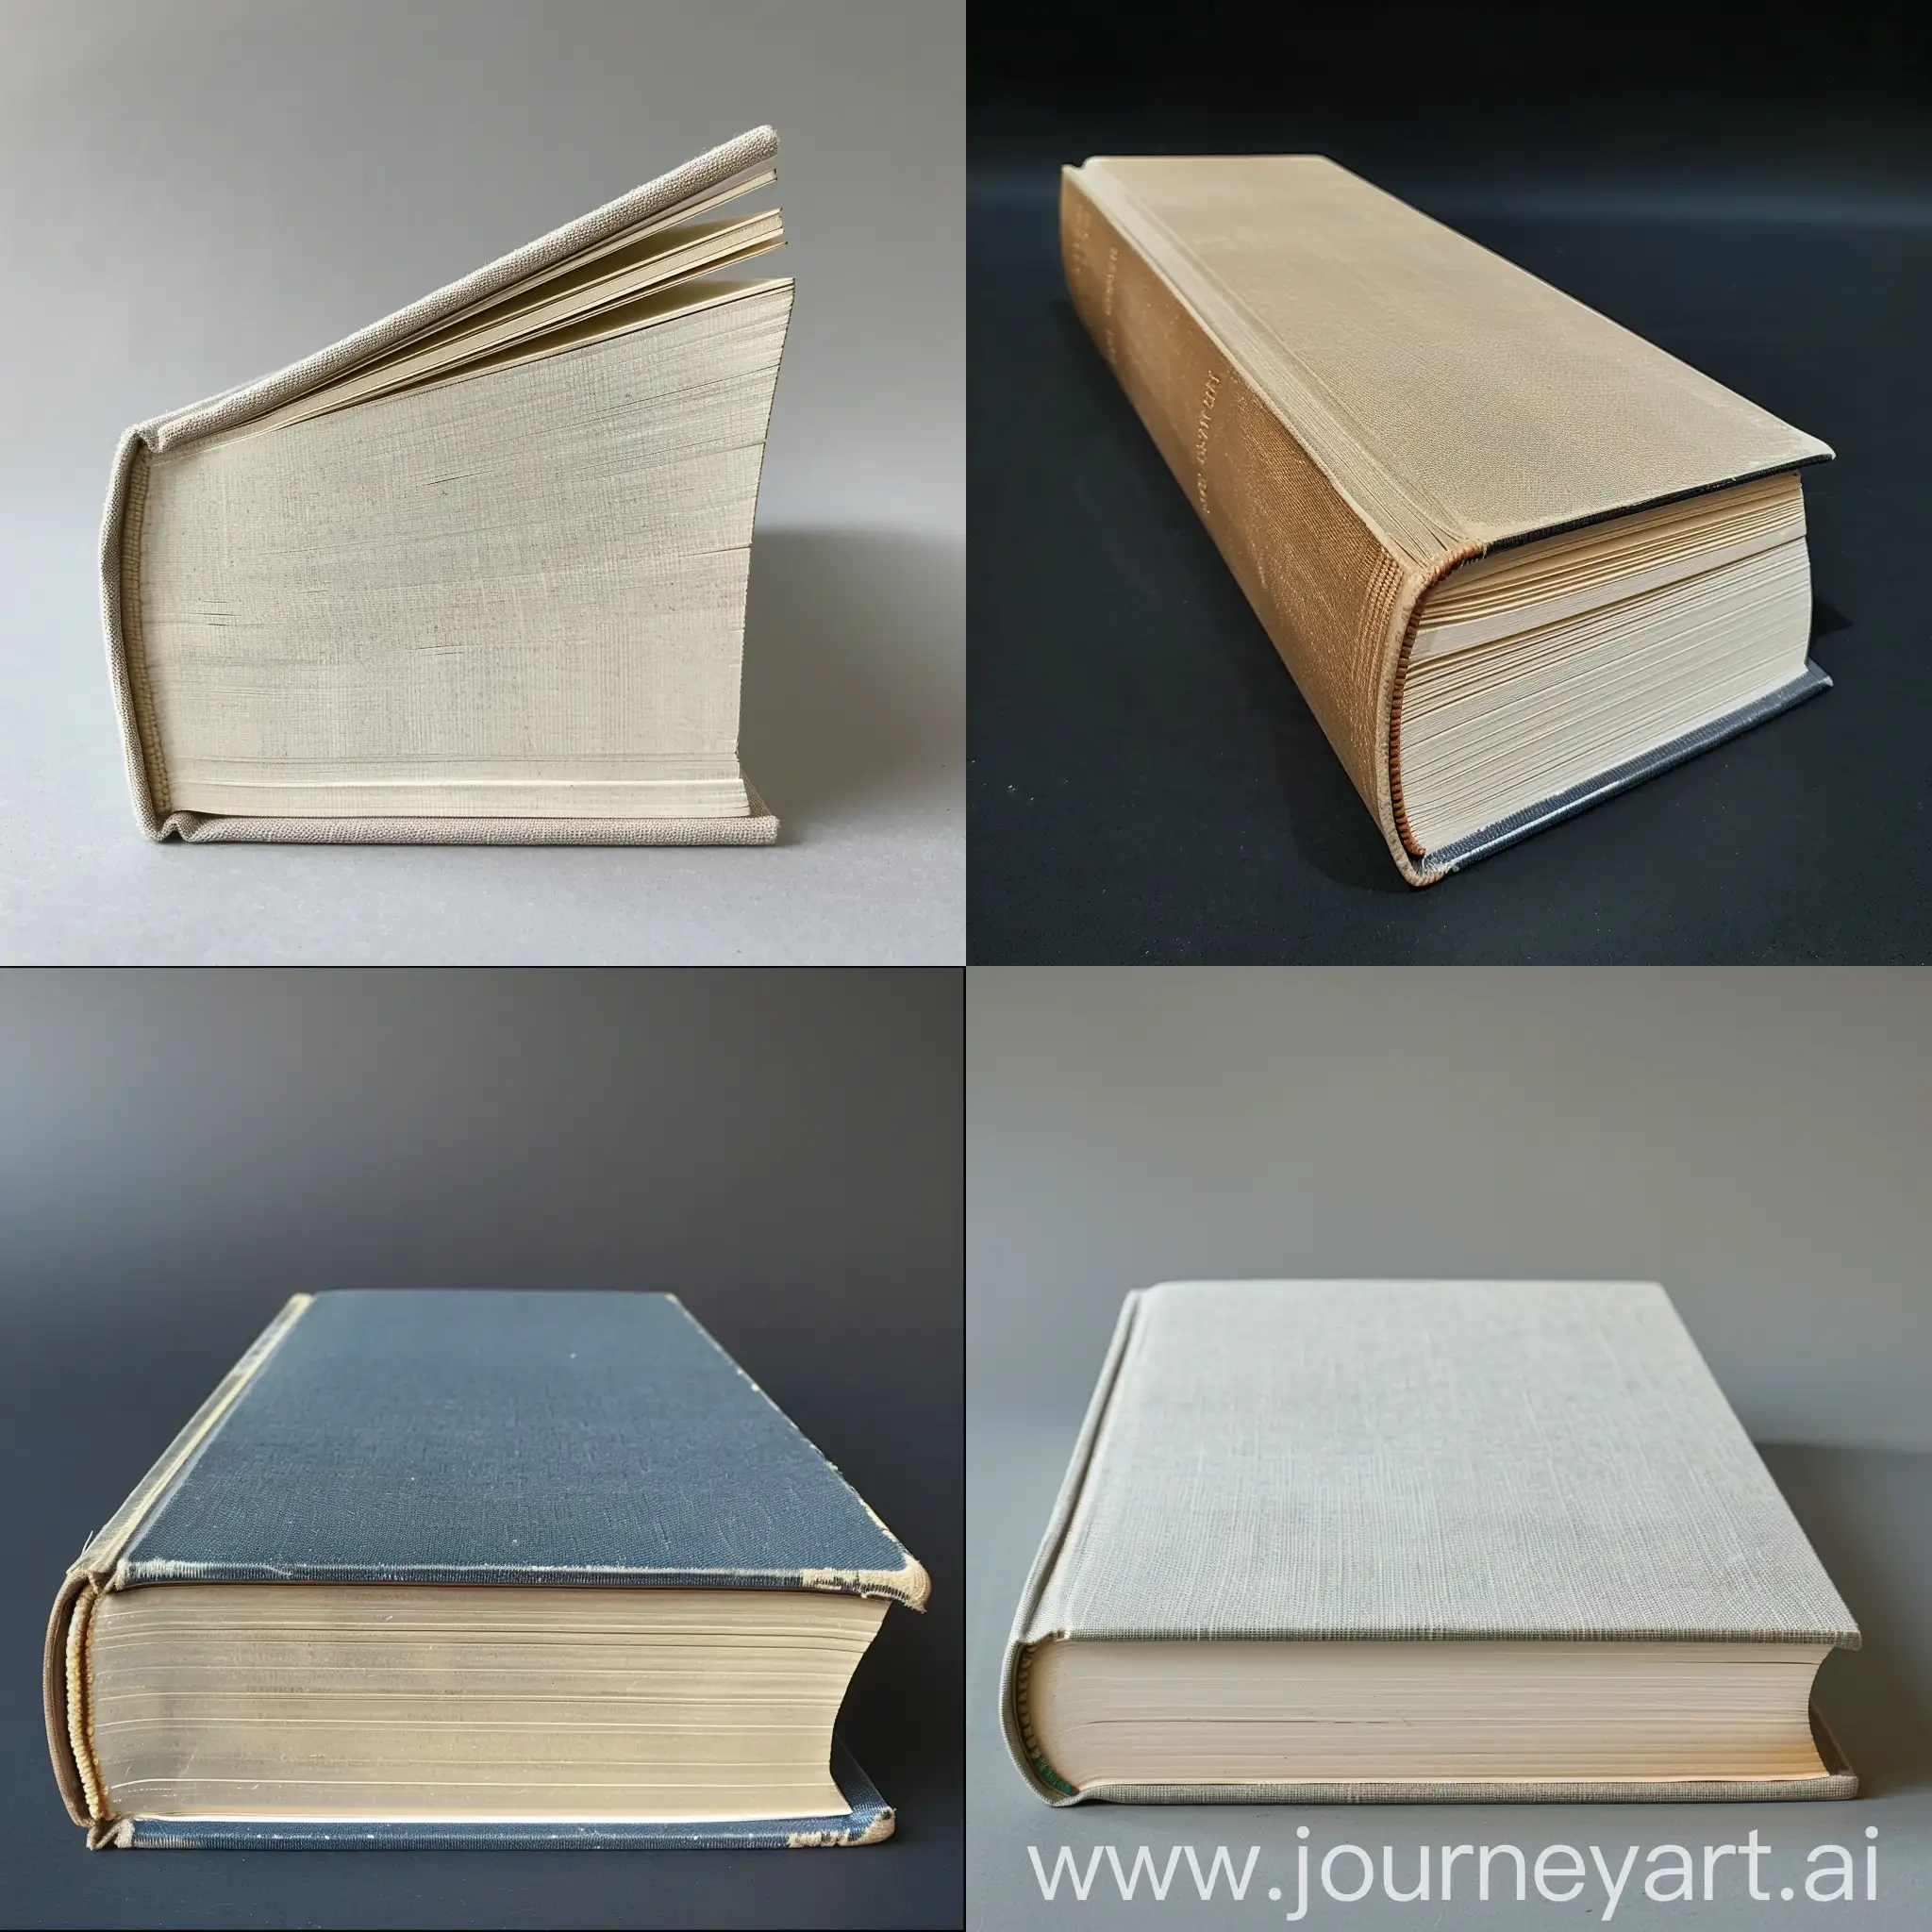 A book from the side with the spine facing up and slightly opened
